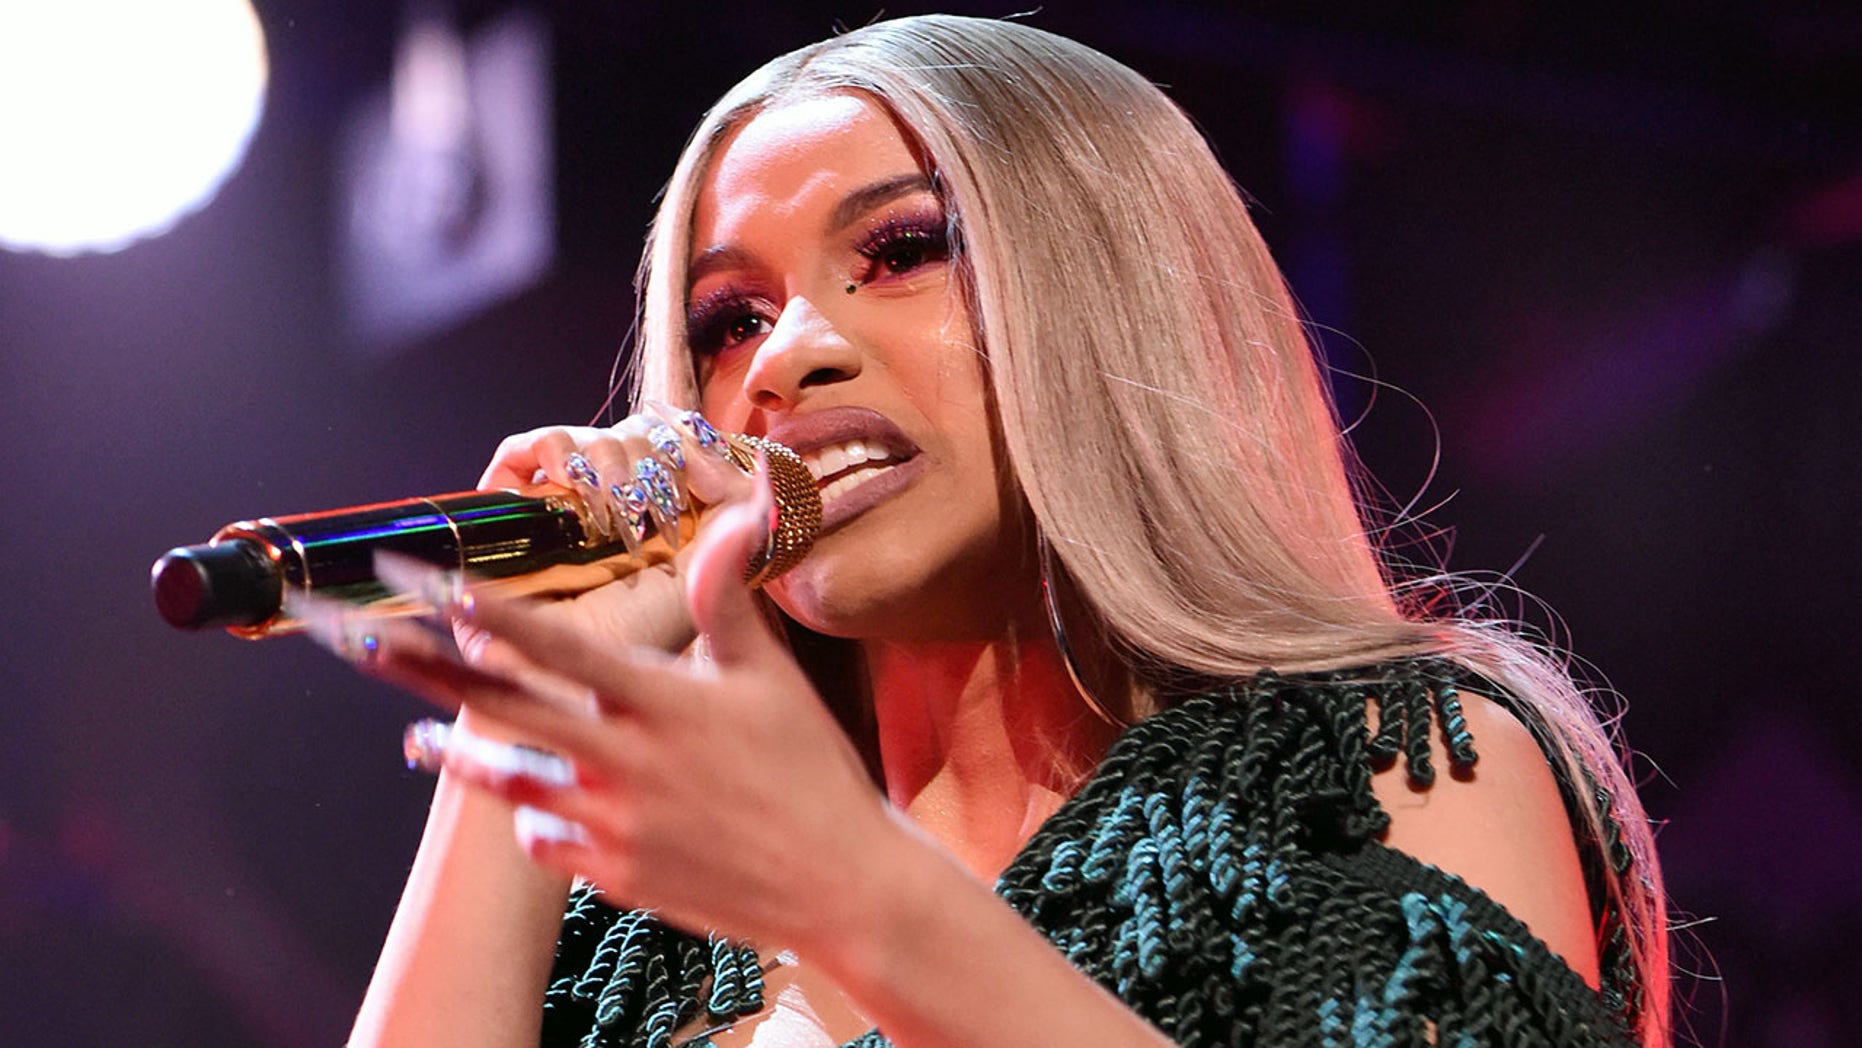 Cardi B lashes out about harassment, pressures of fame in expletive-laden rant